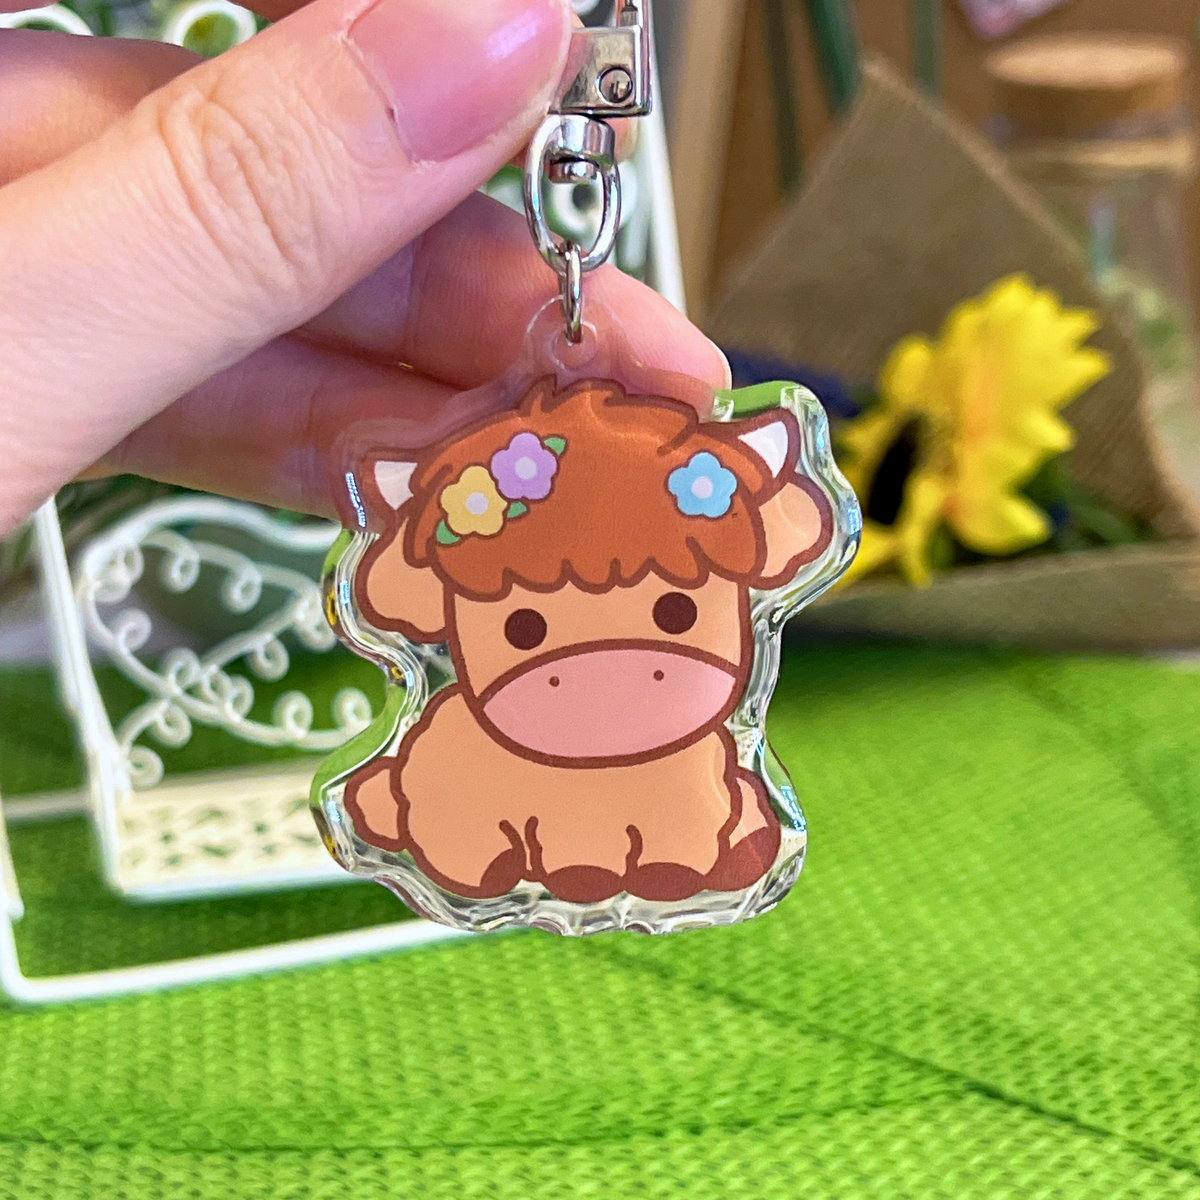 Obsessing over these cow keychains 🐮🤠 #cow #highlandcow #keychain #d